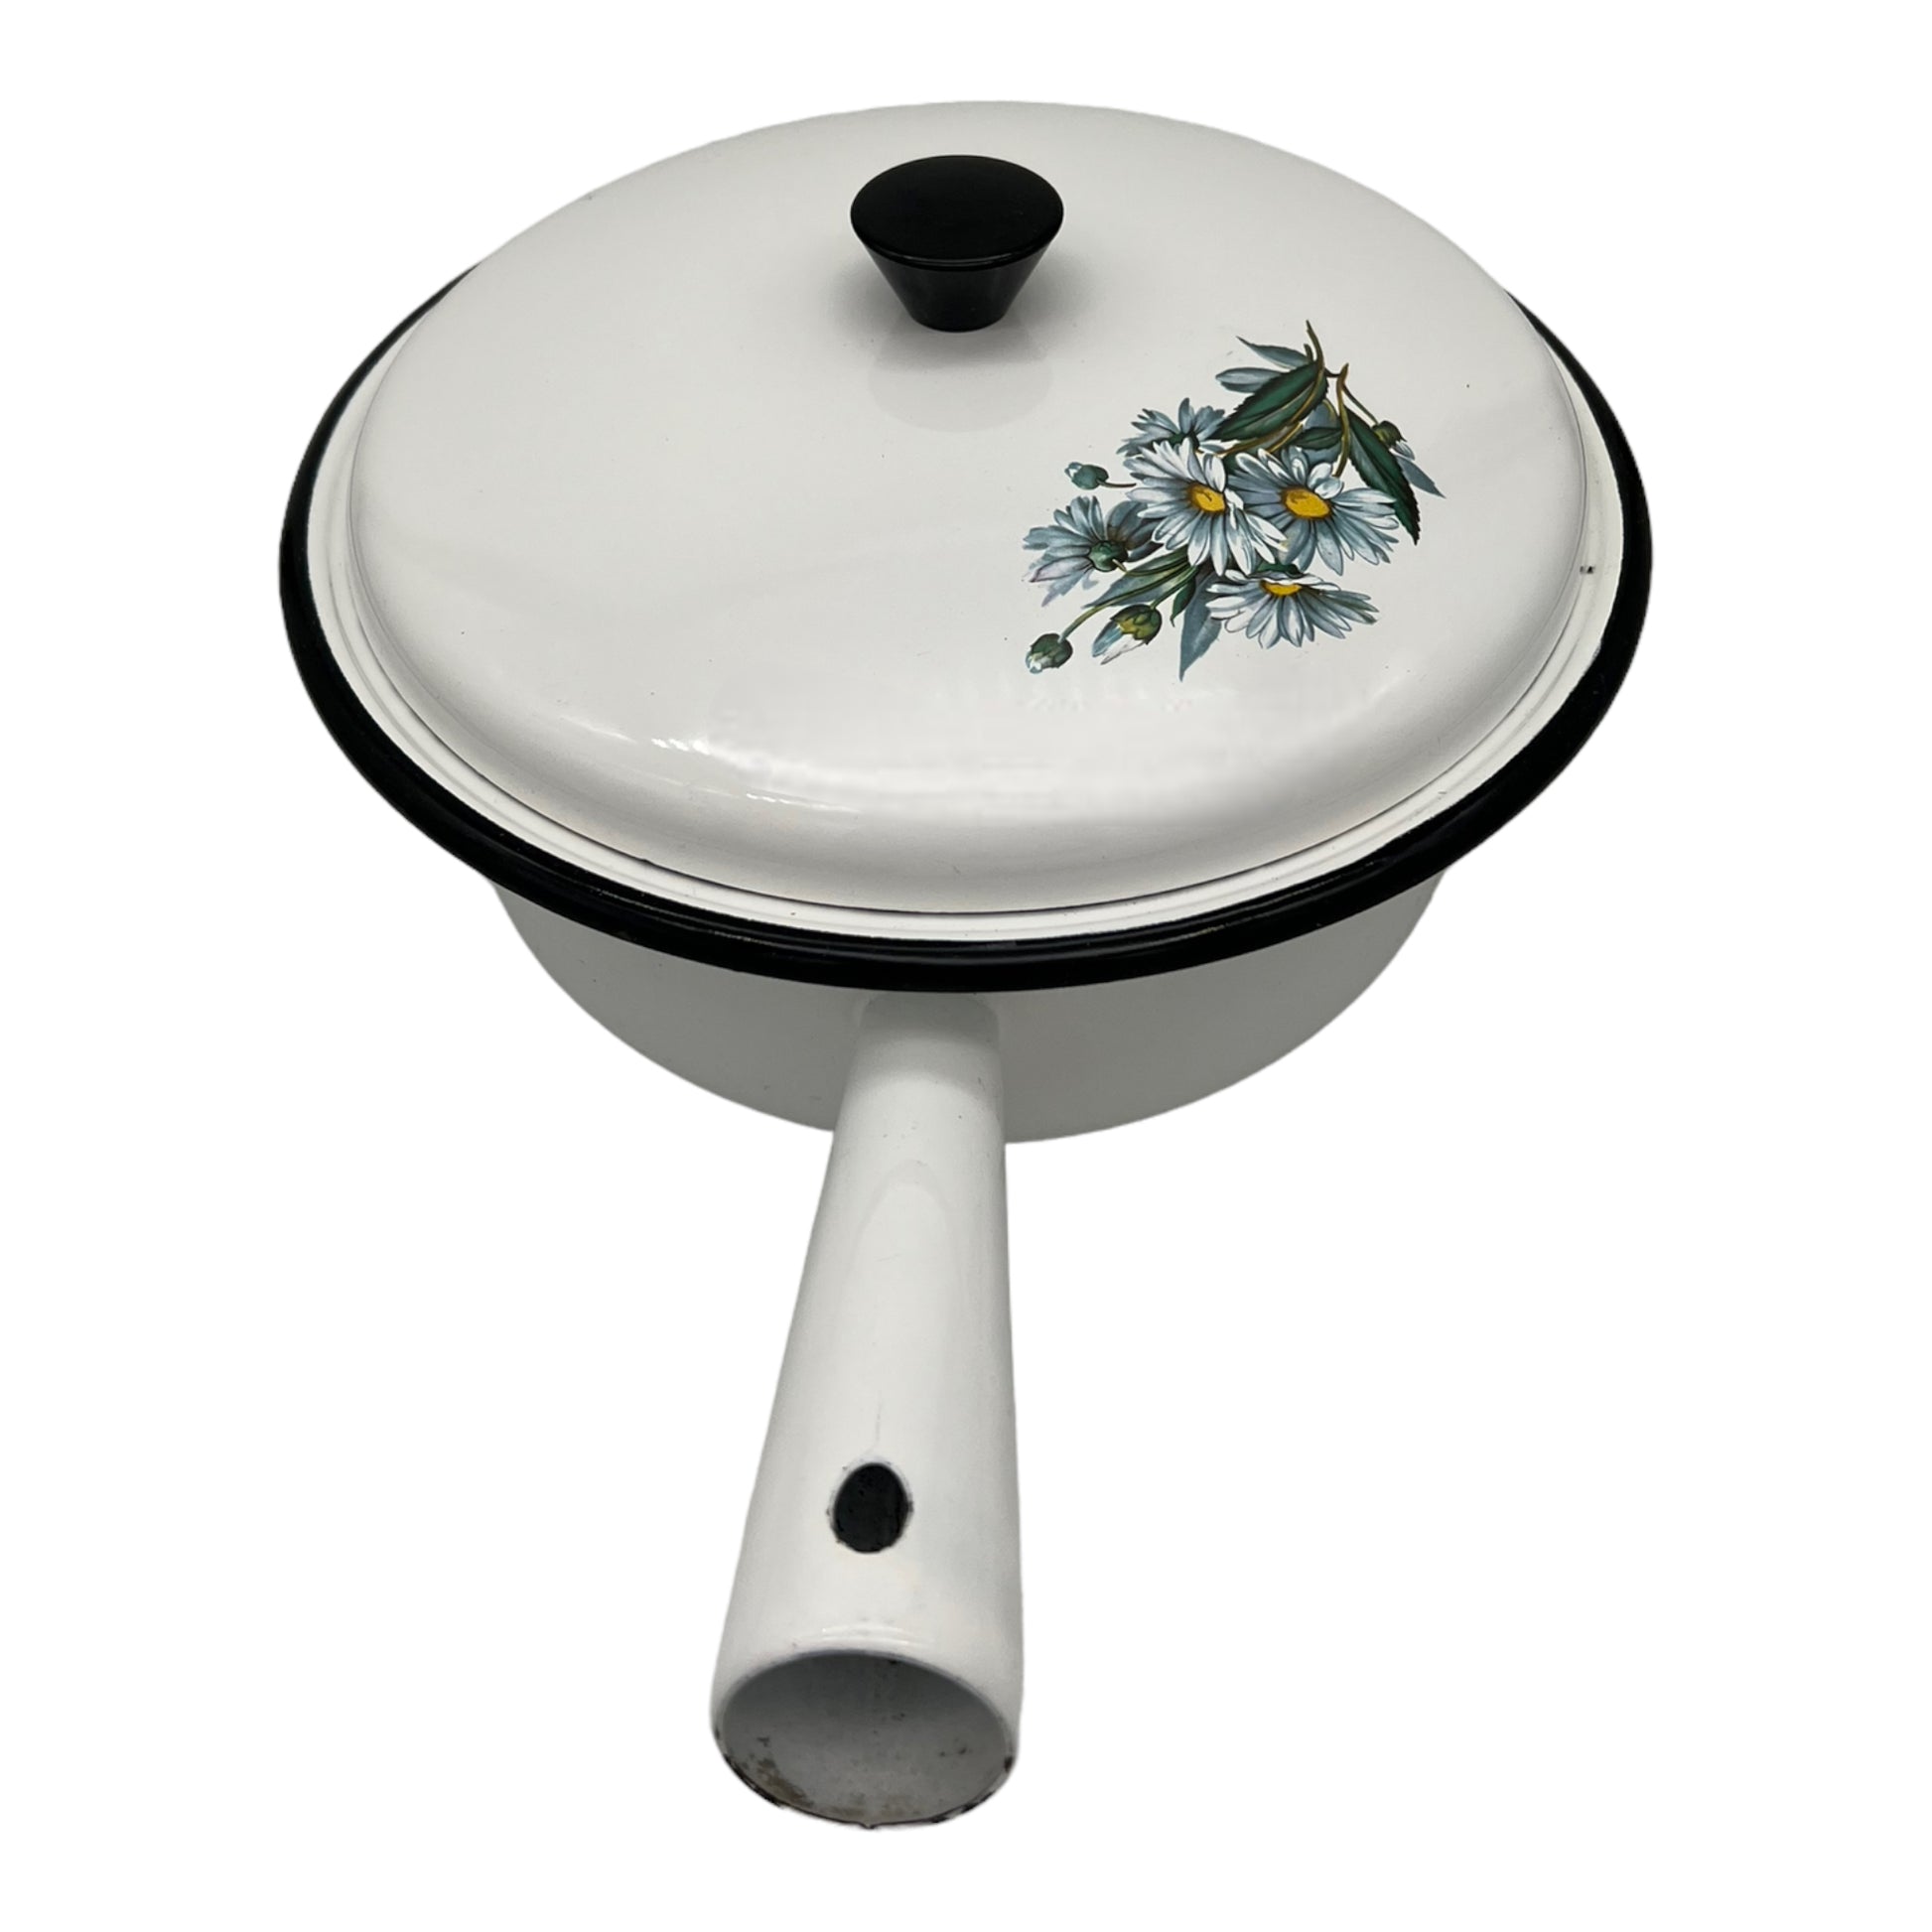 French vintage enamel flower design saucepan with lid sold by All Things French Store